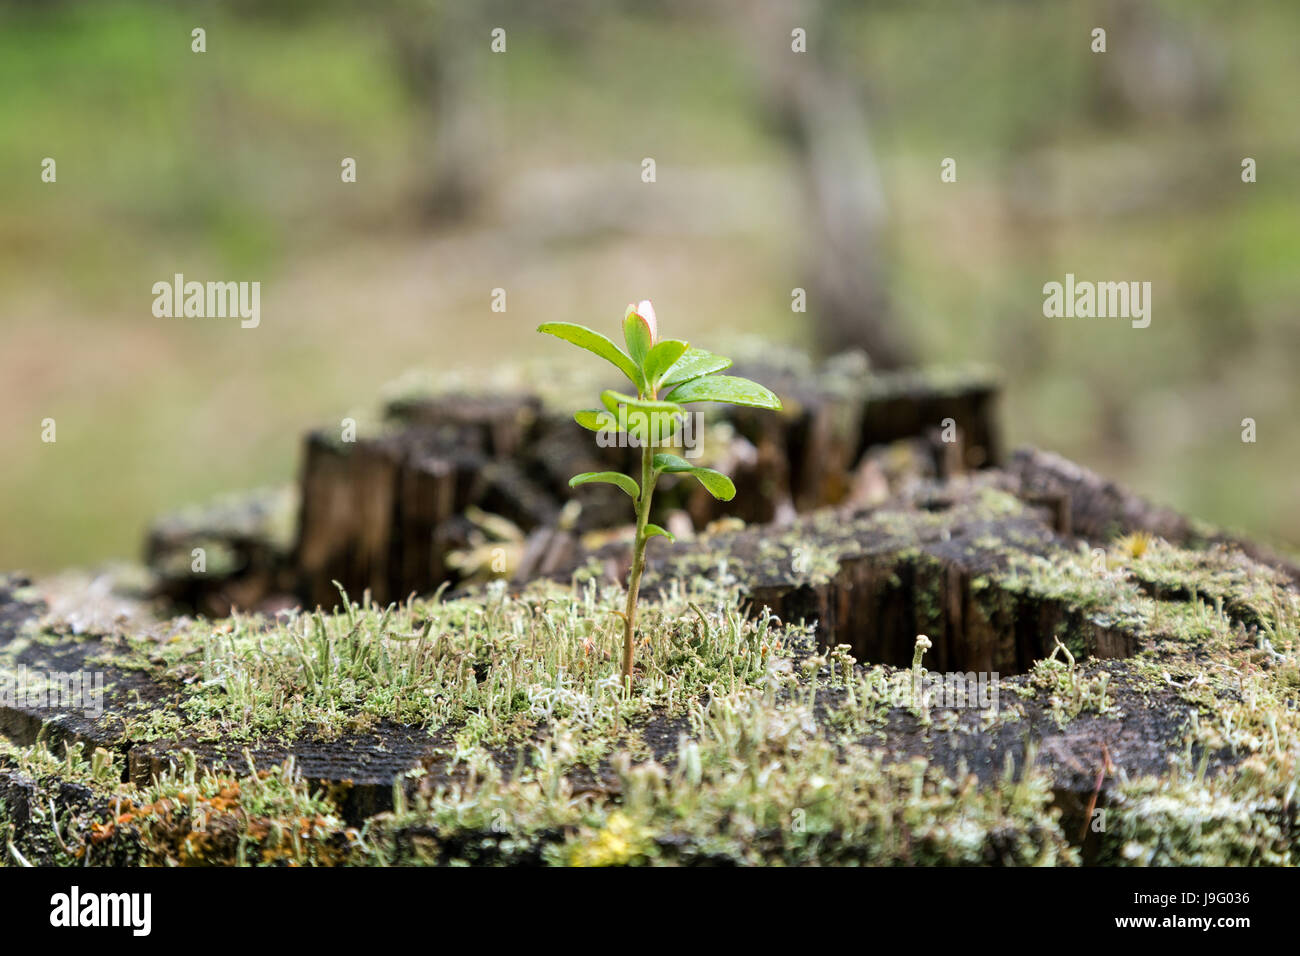 Close-up of a lingonberry (or cowberry, huckleberry, foxberry) sapling, moss and lichen growing on top of a stump of a tree in the forest. Stock Photo